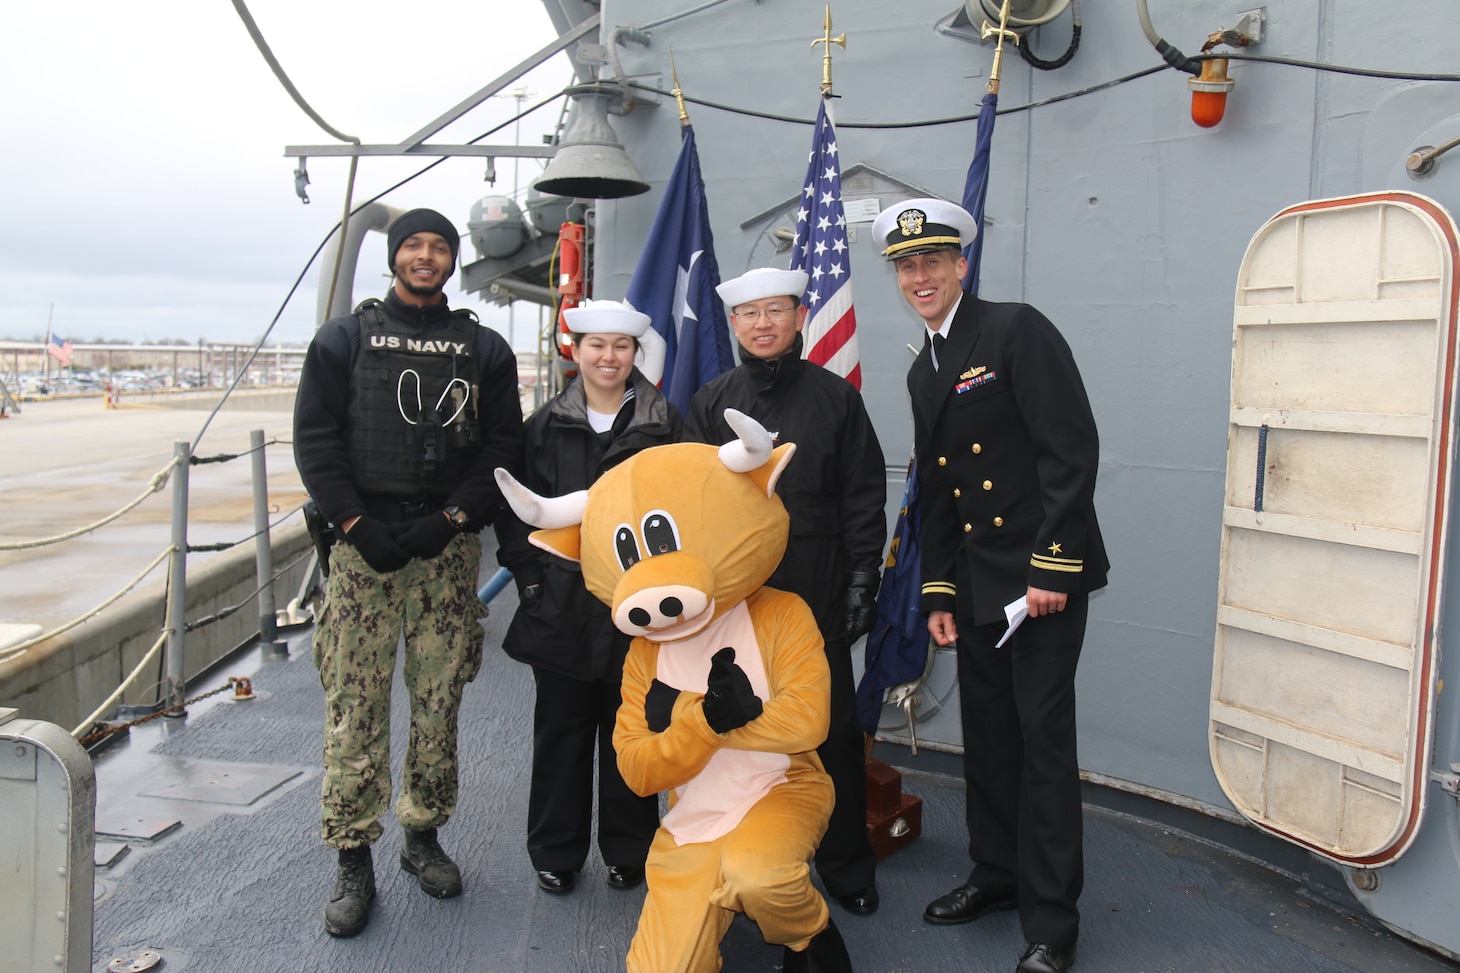 NORFOLK, Va. (Jan. 23, 2023) Crew members of the Ticonderoga-class guided-missile cruiser USS San Jacinto (CG 56) pose with the ship mascot during a tour of the ship in celebration of their 35-year commissioning anniversary, Jan. 23, 2023. San Jacinto is currently in port onboard Naval Station Norfolk